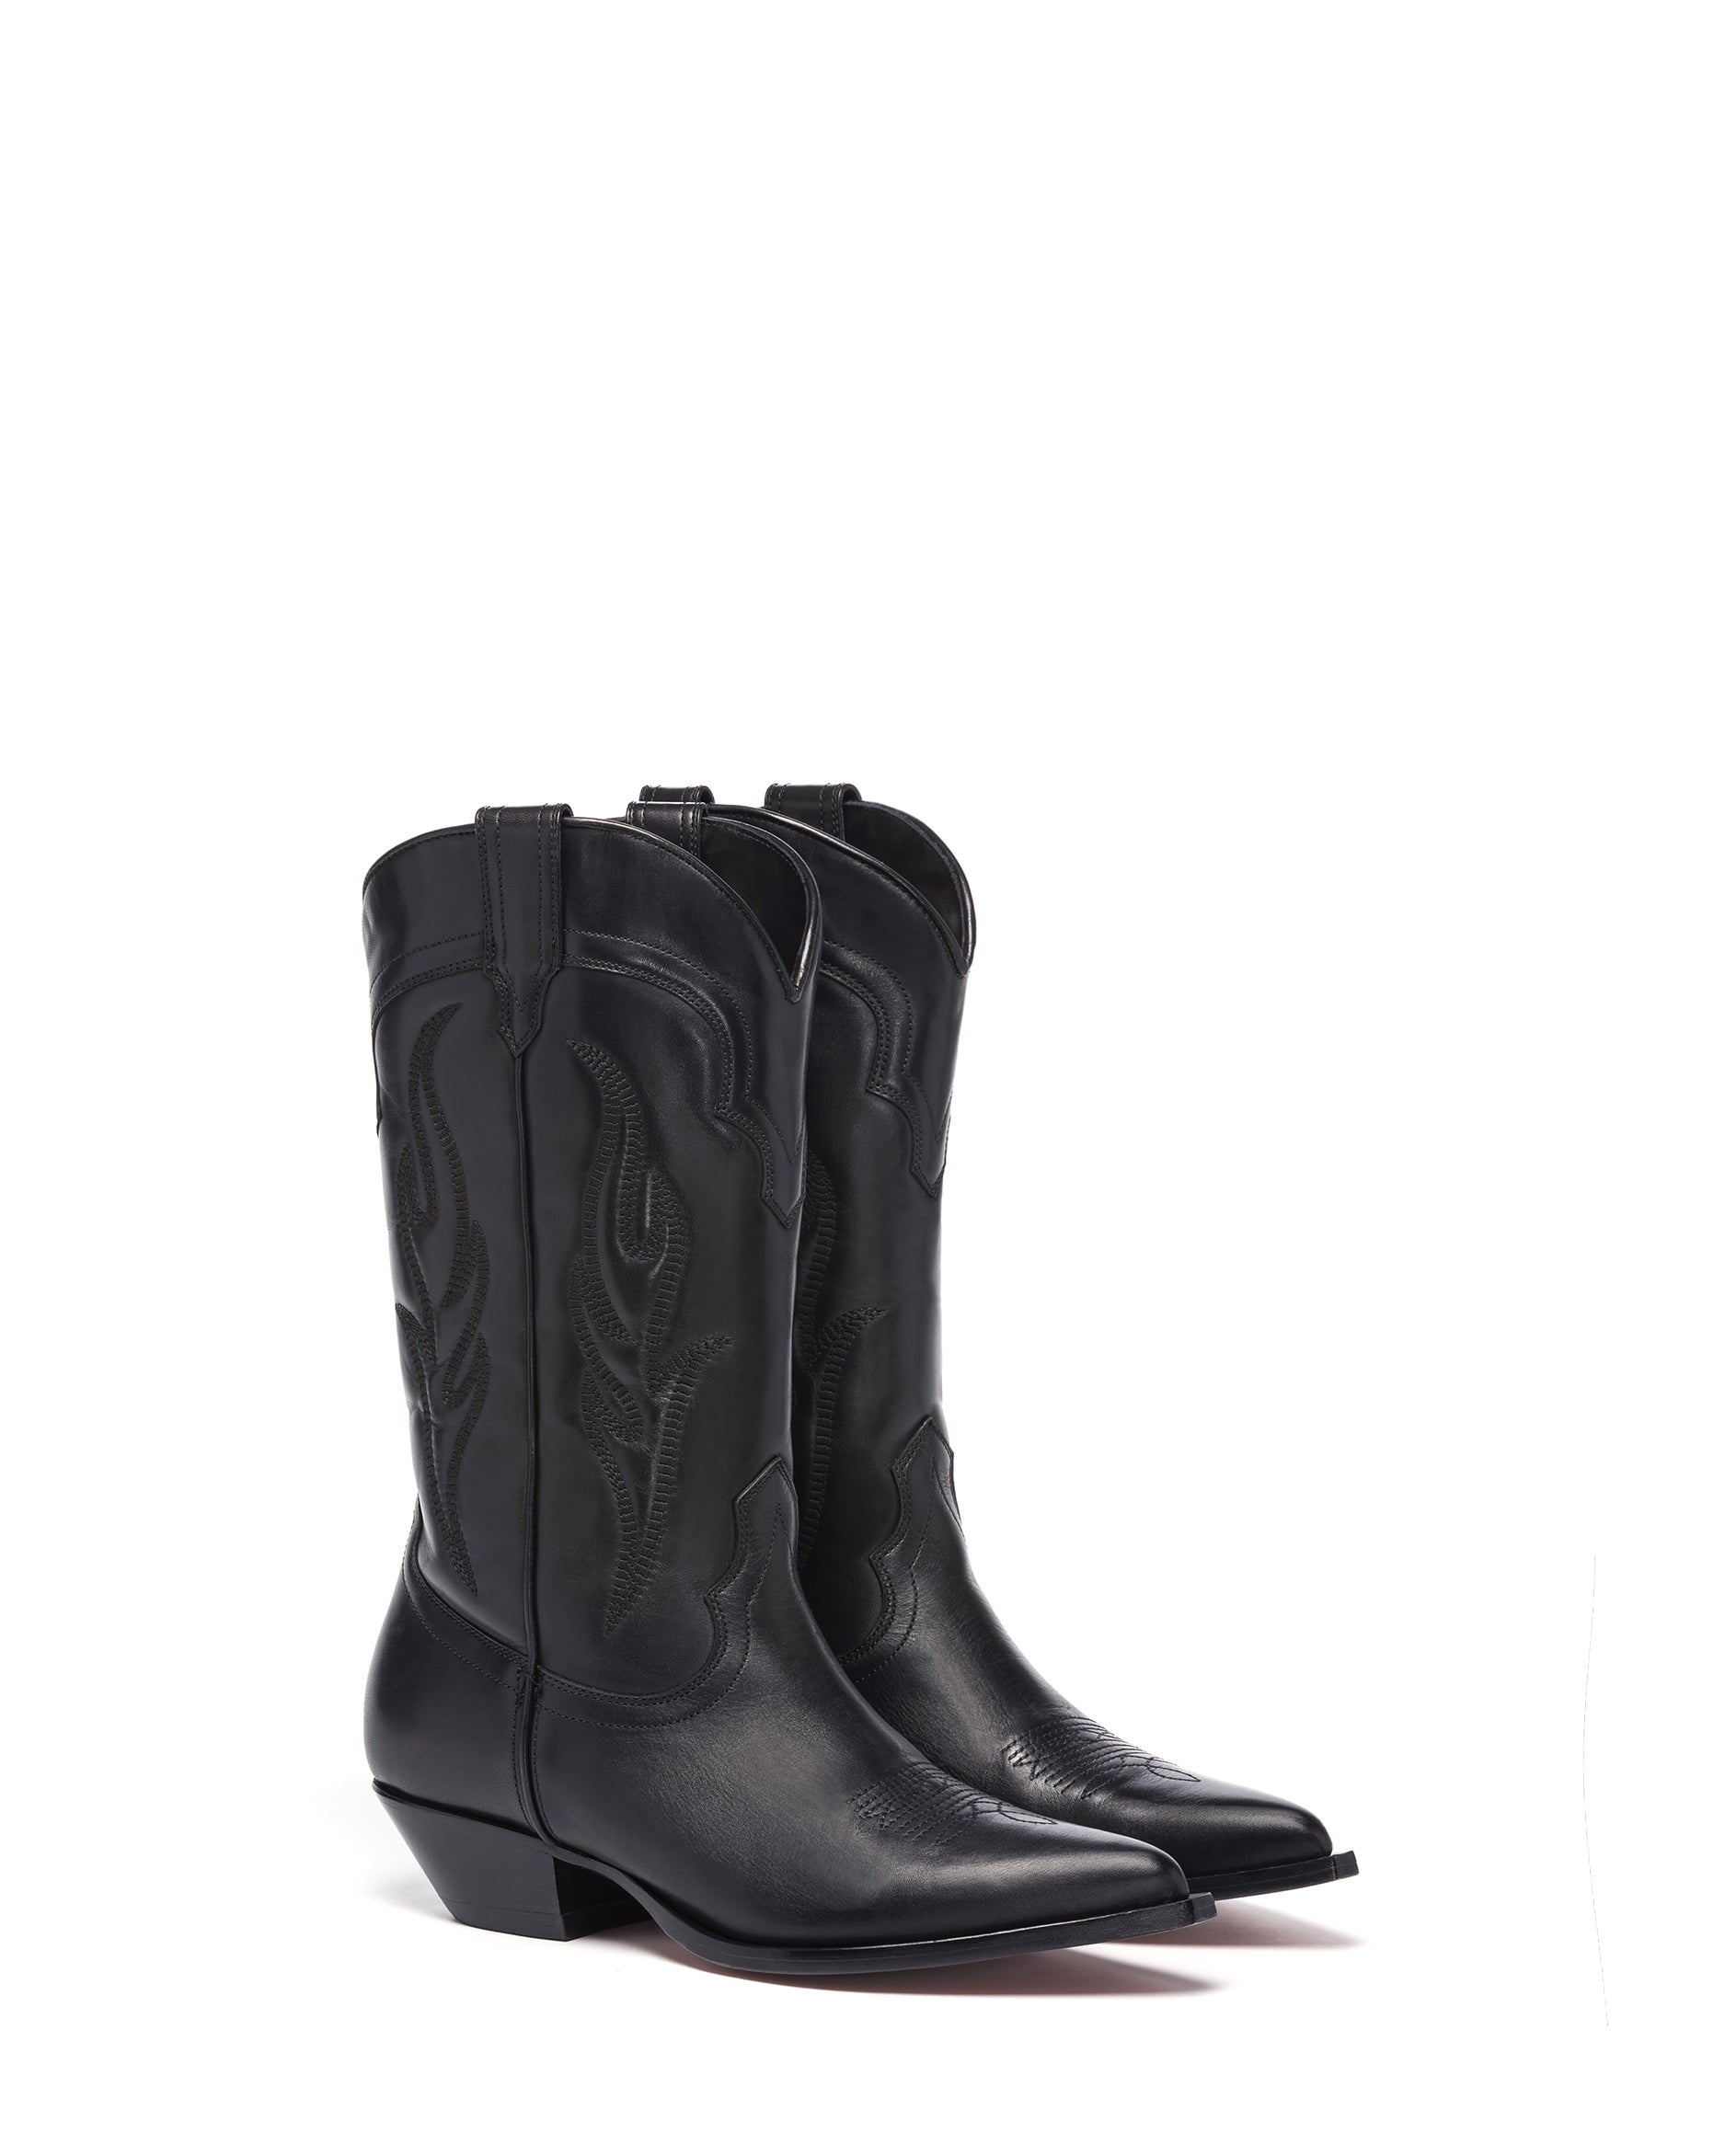 SANTA FE Women's Cowboy Boots in Black Calfskin | On tone embroidery 02